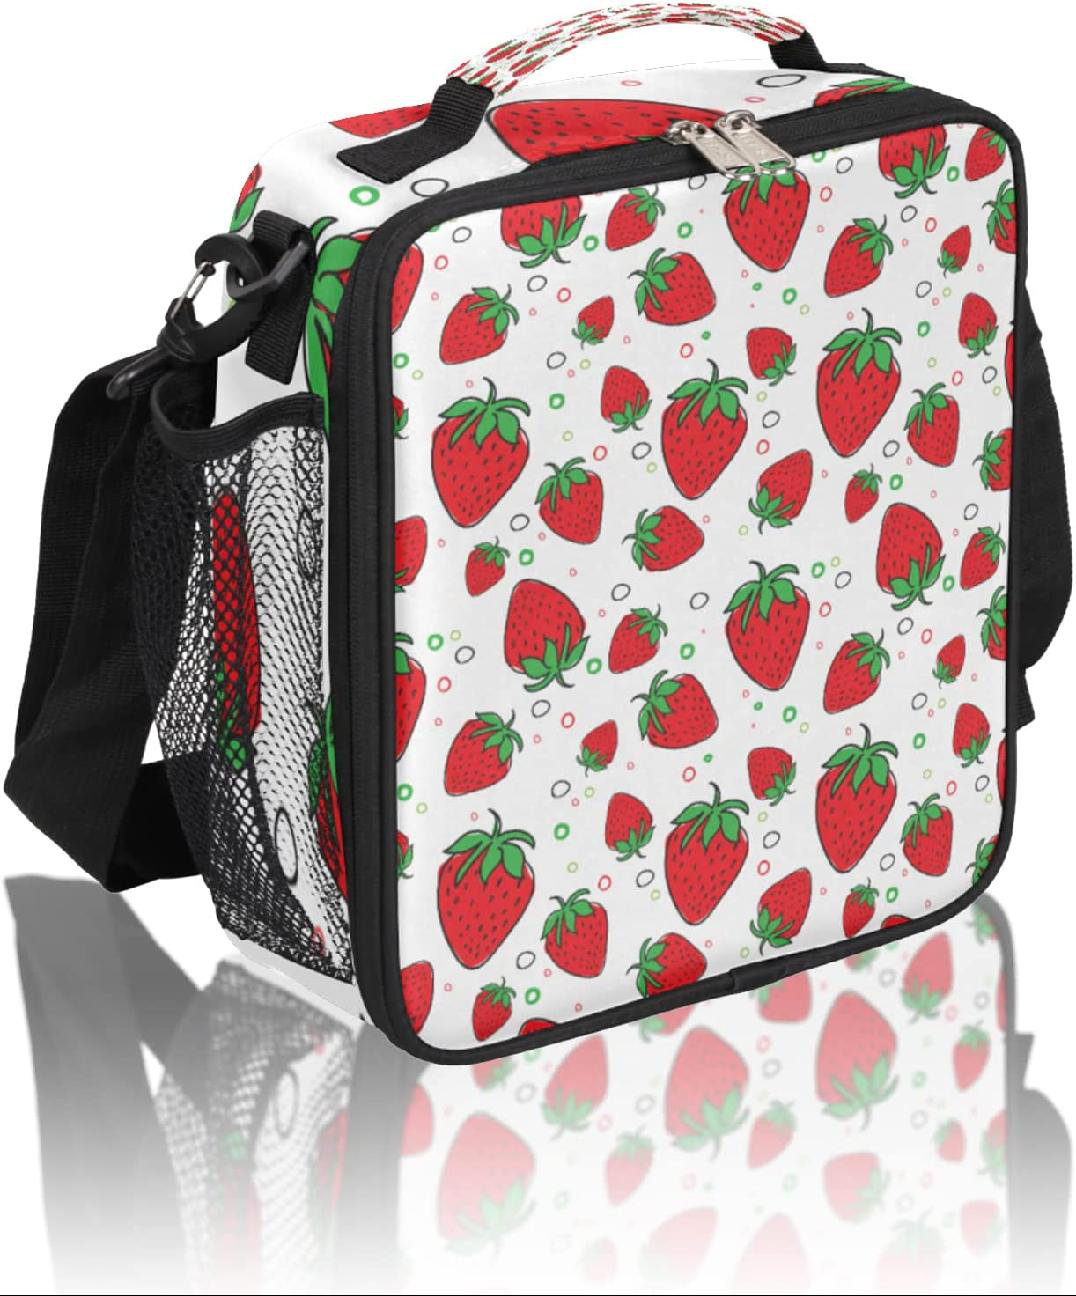 Oxford Lunch Bags for Women Large Capacity Lunch Box Insulated Bag Ladies  Picnic Food Shoulder Bags Cooler Hand Bag Tote